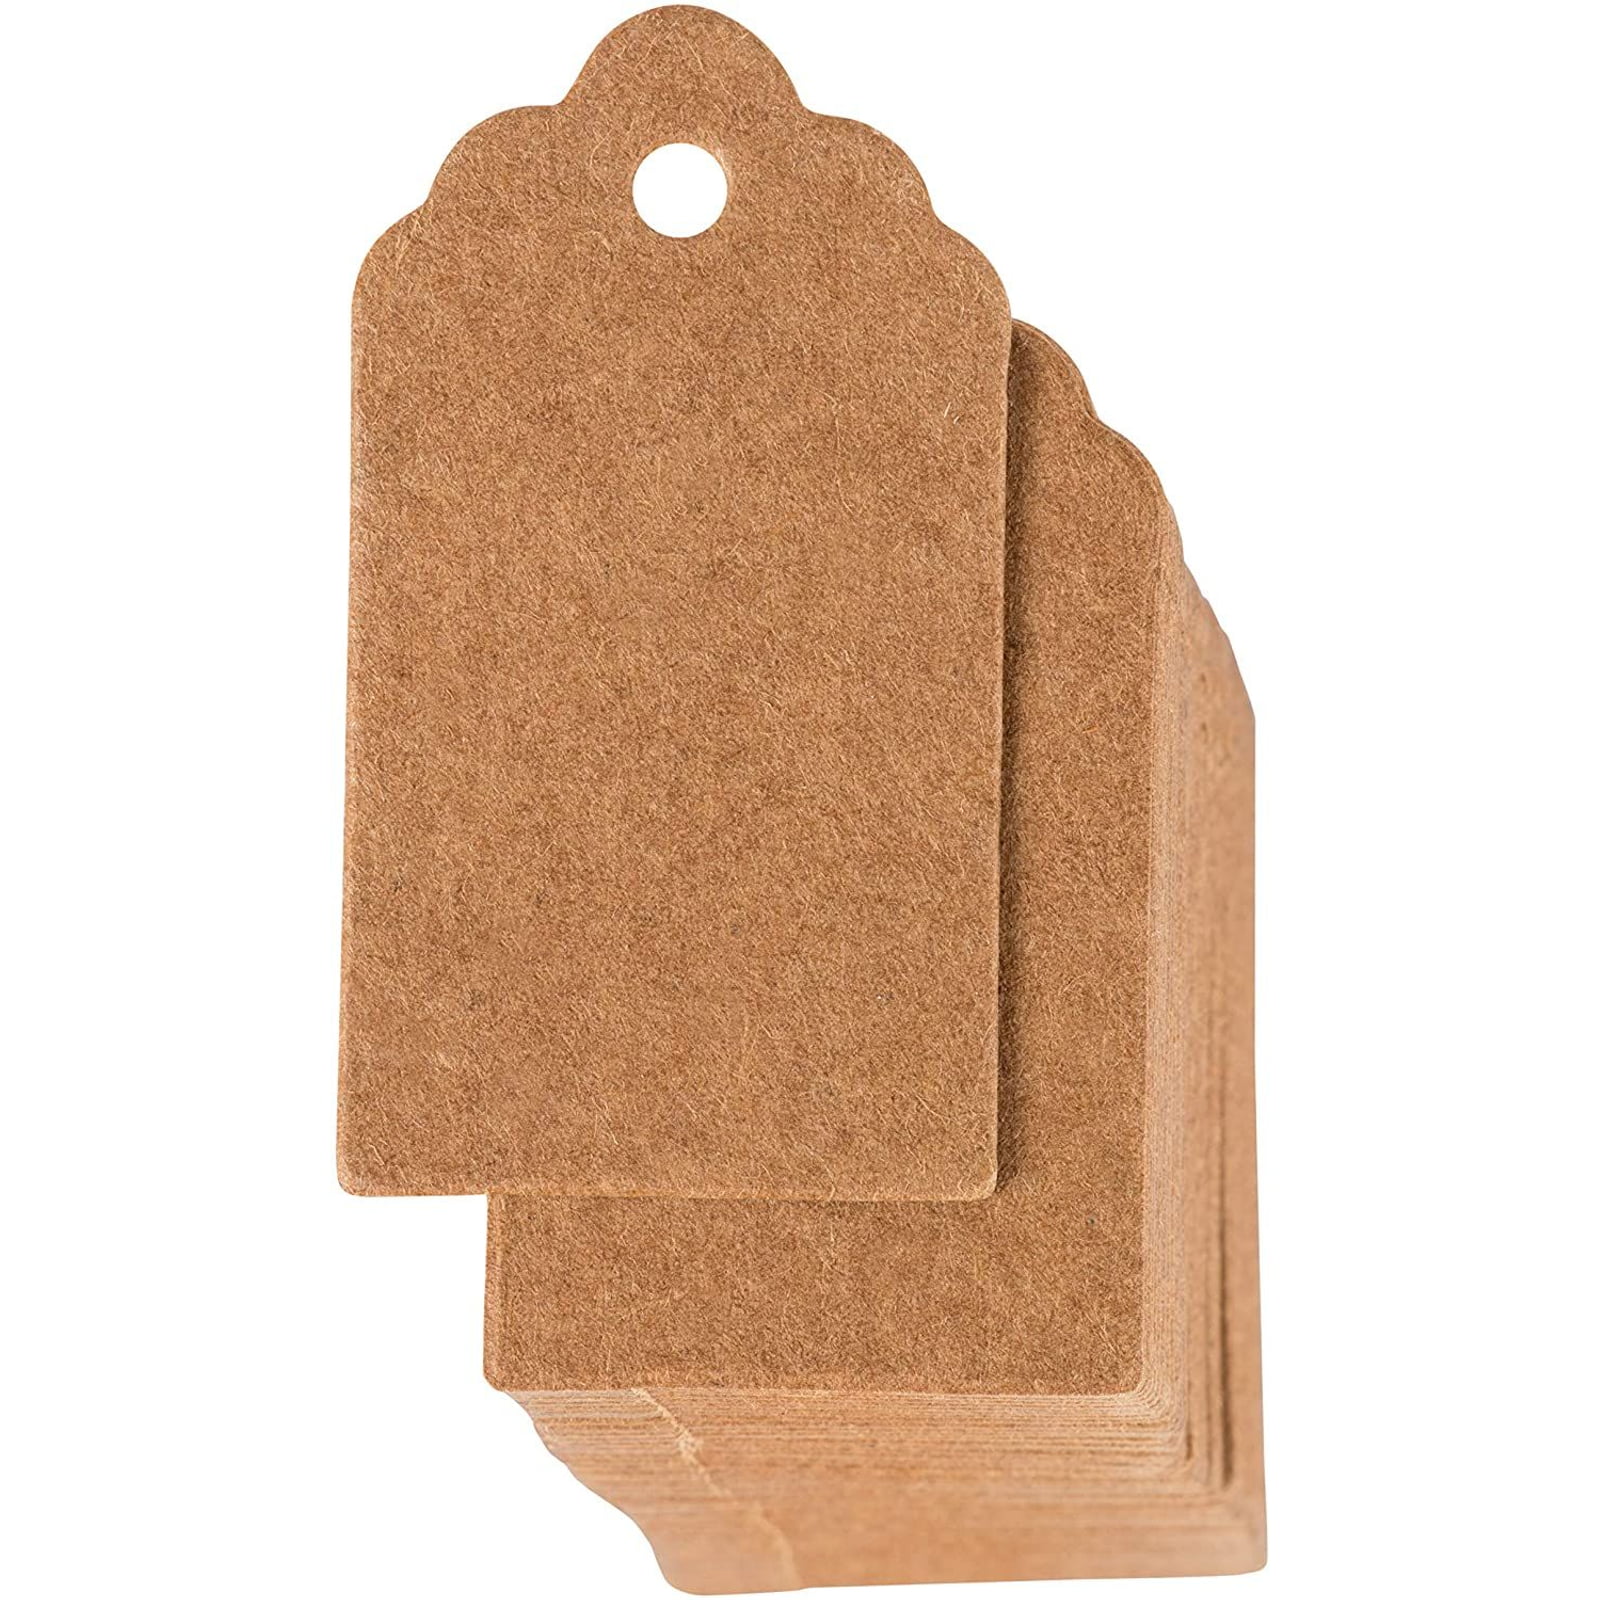 100pcs/Set 4 X 2cm Brown Kraft Paper Hang Tags Label Party Price Gift Cards 